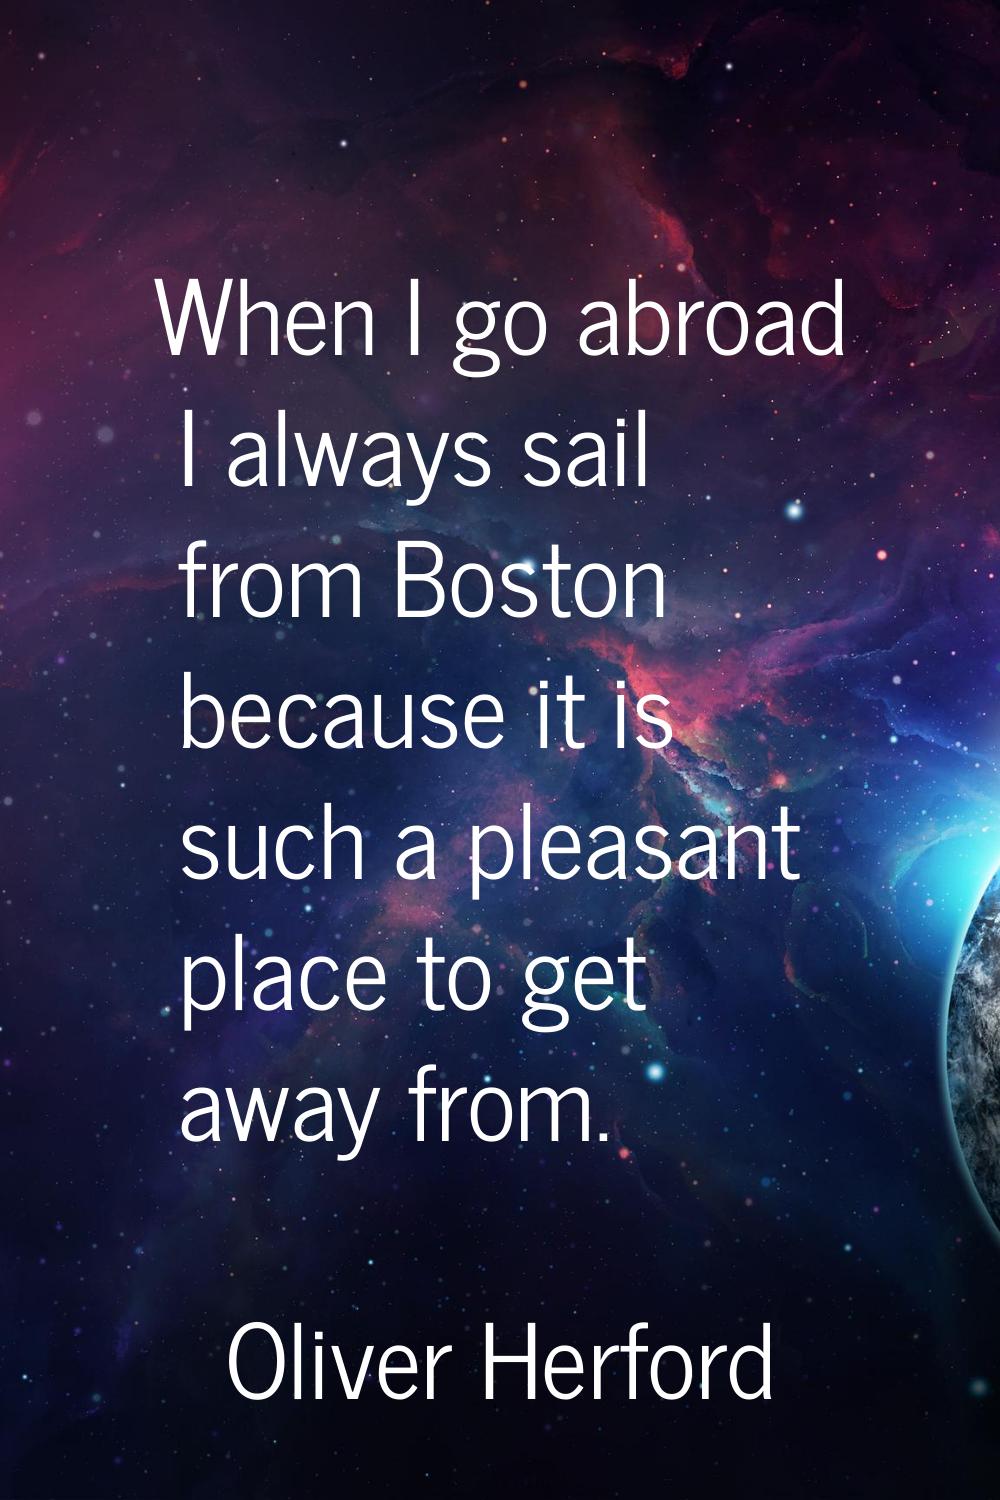 When I go abroad I always sail from Boston because it is such a pleasant place to get away from.